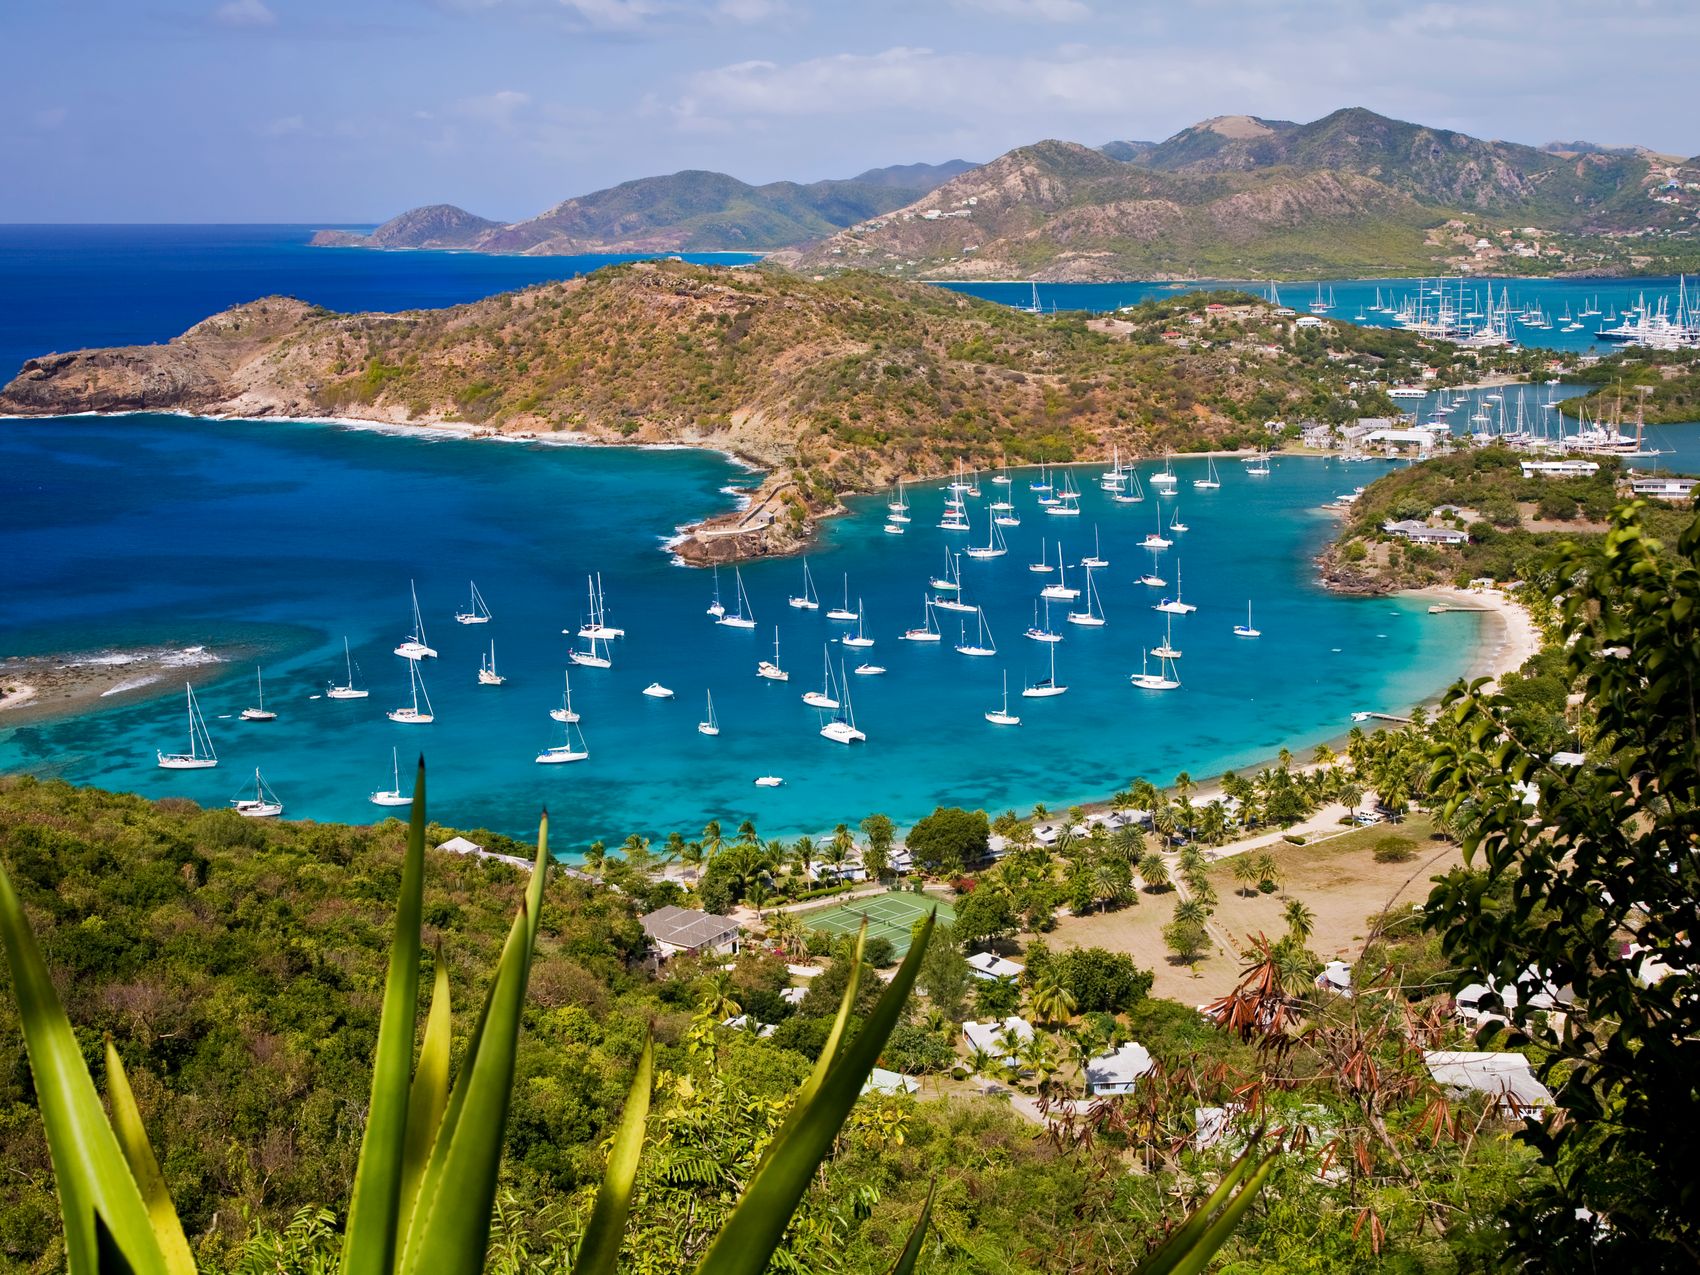 Sailing in January? Possible in these TOP 5 Caribbean destinations